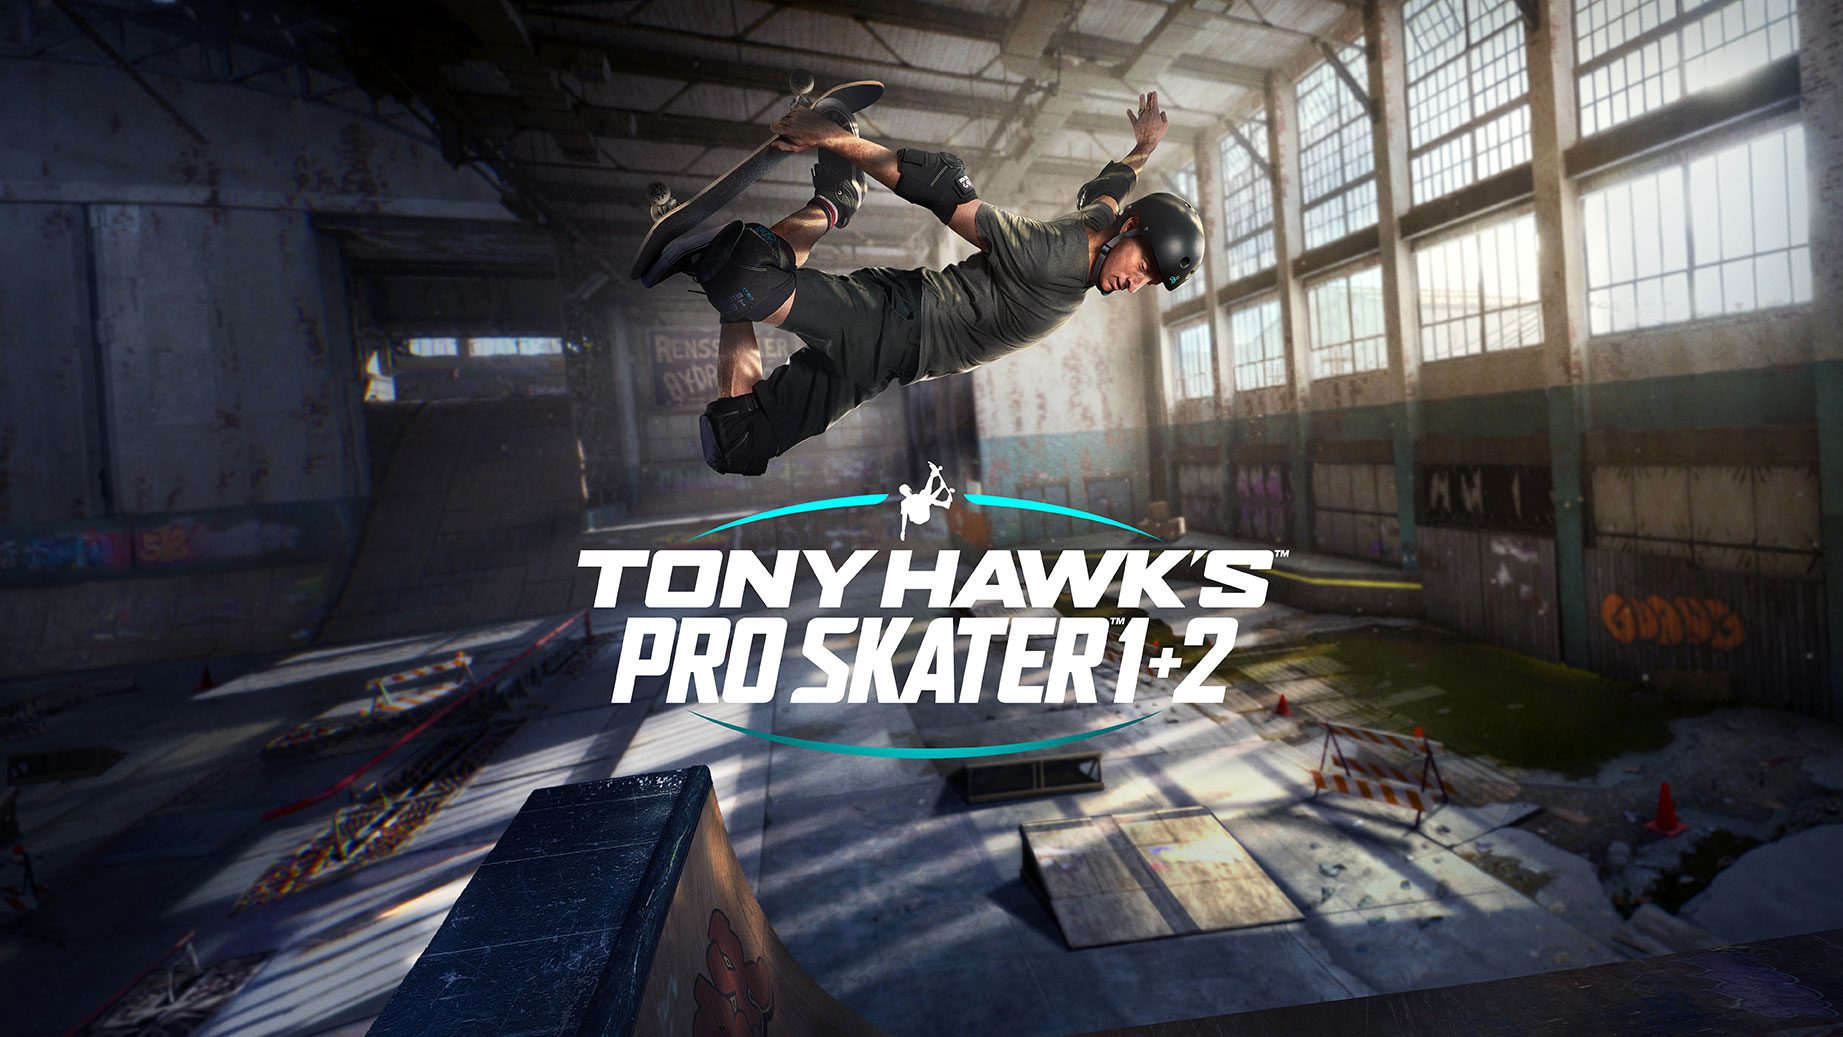 Tony Tony Hawk’s Pro Skater 1 + 2 is coming to Switch, PS5 and Xbox Series X/S